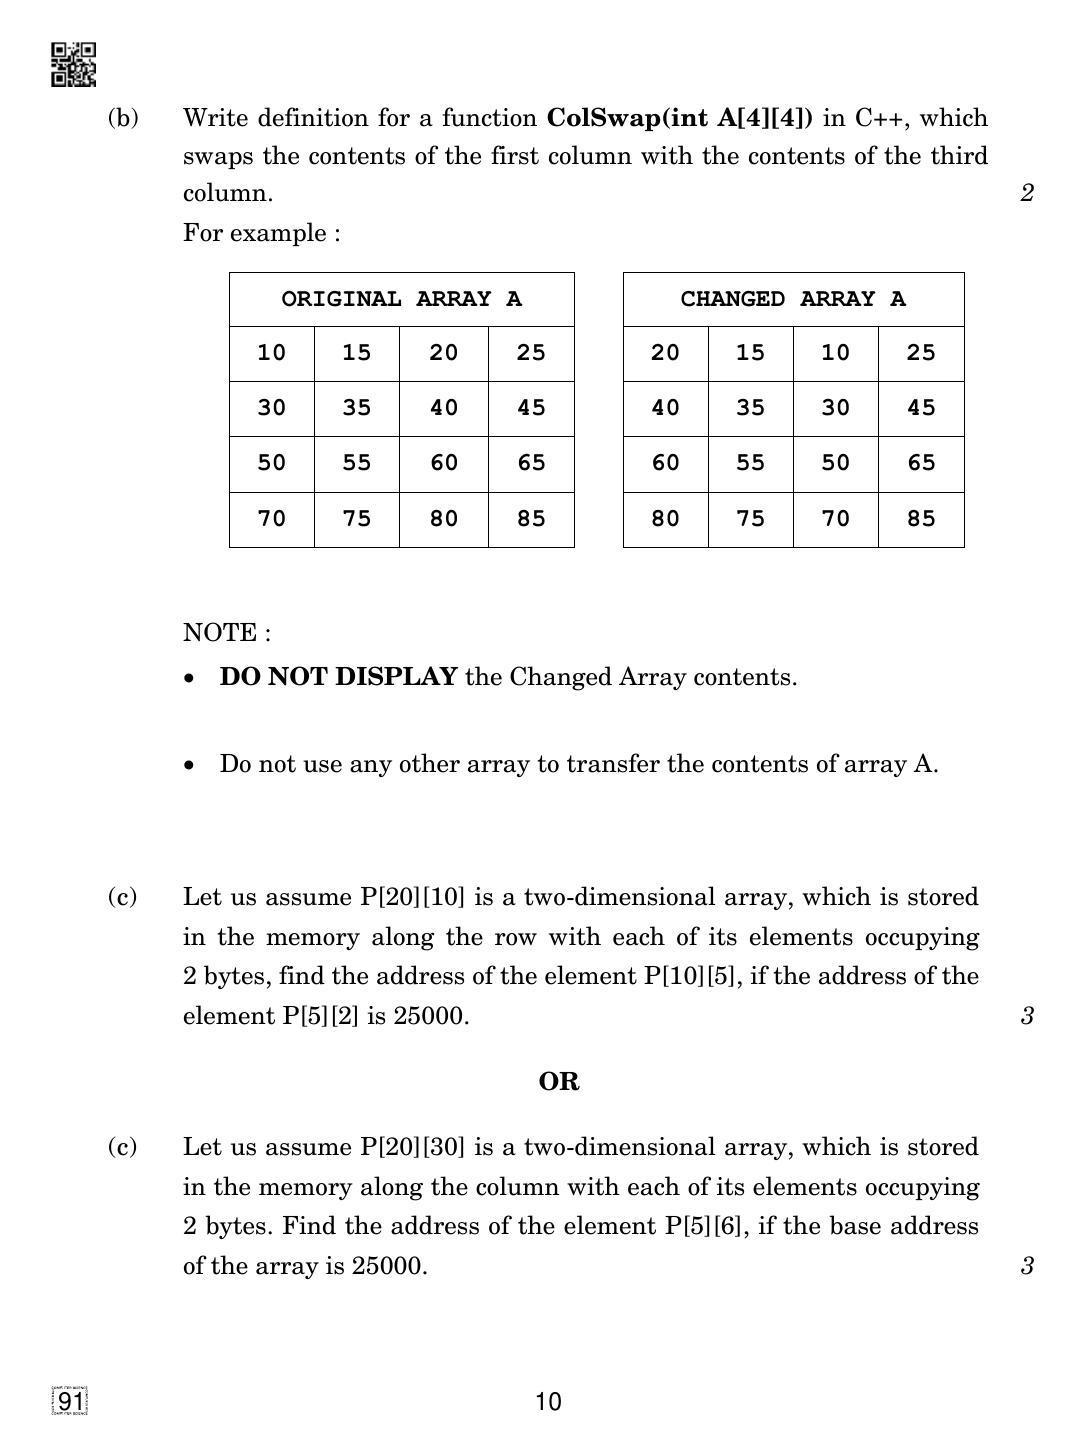 CBSE Class 12 91 Computer Science 2019 Question Paper - Page 10